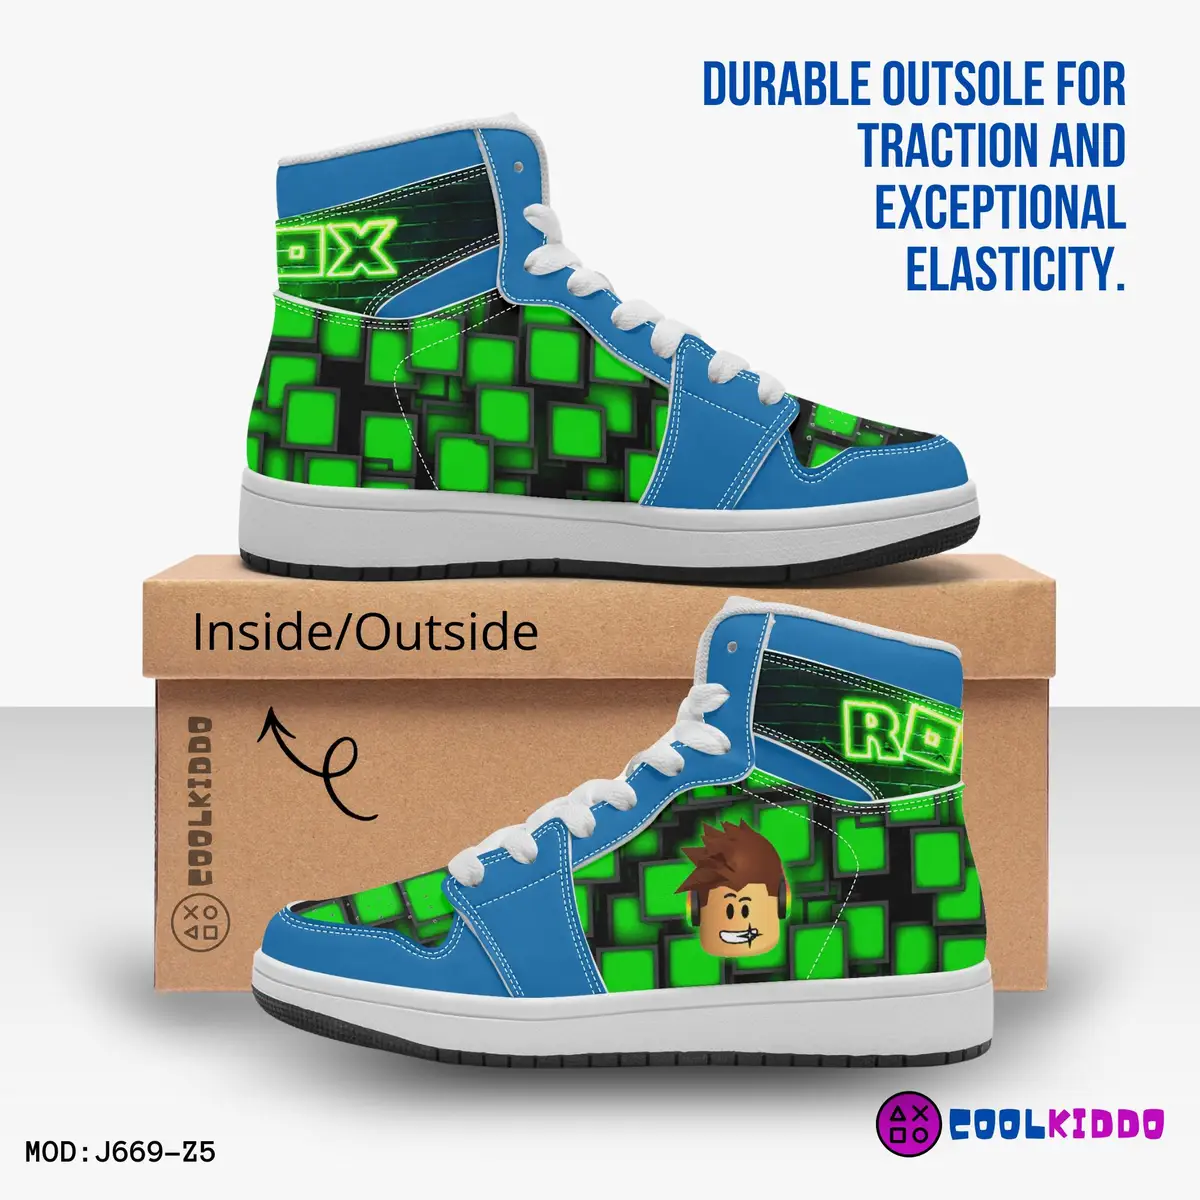 Kids ROBLOX Characters High-Top Shoes Leather Green and Blue, Jordans Style Sneakers Cool Kiddo 12